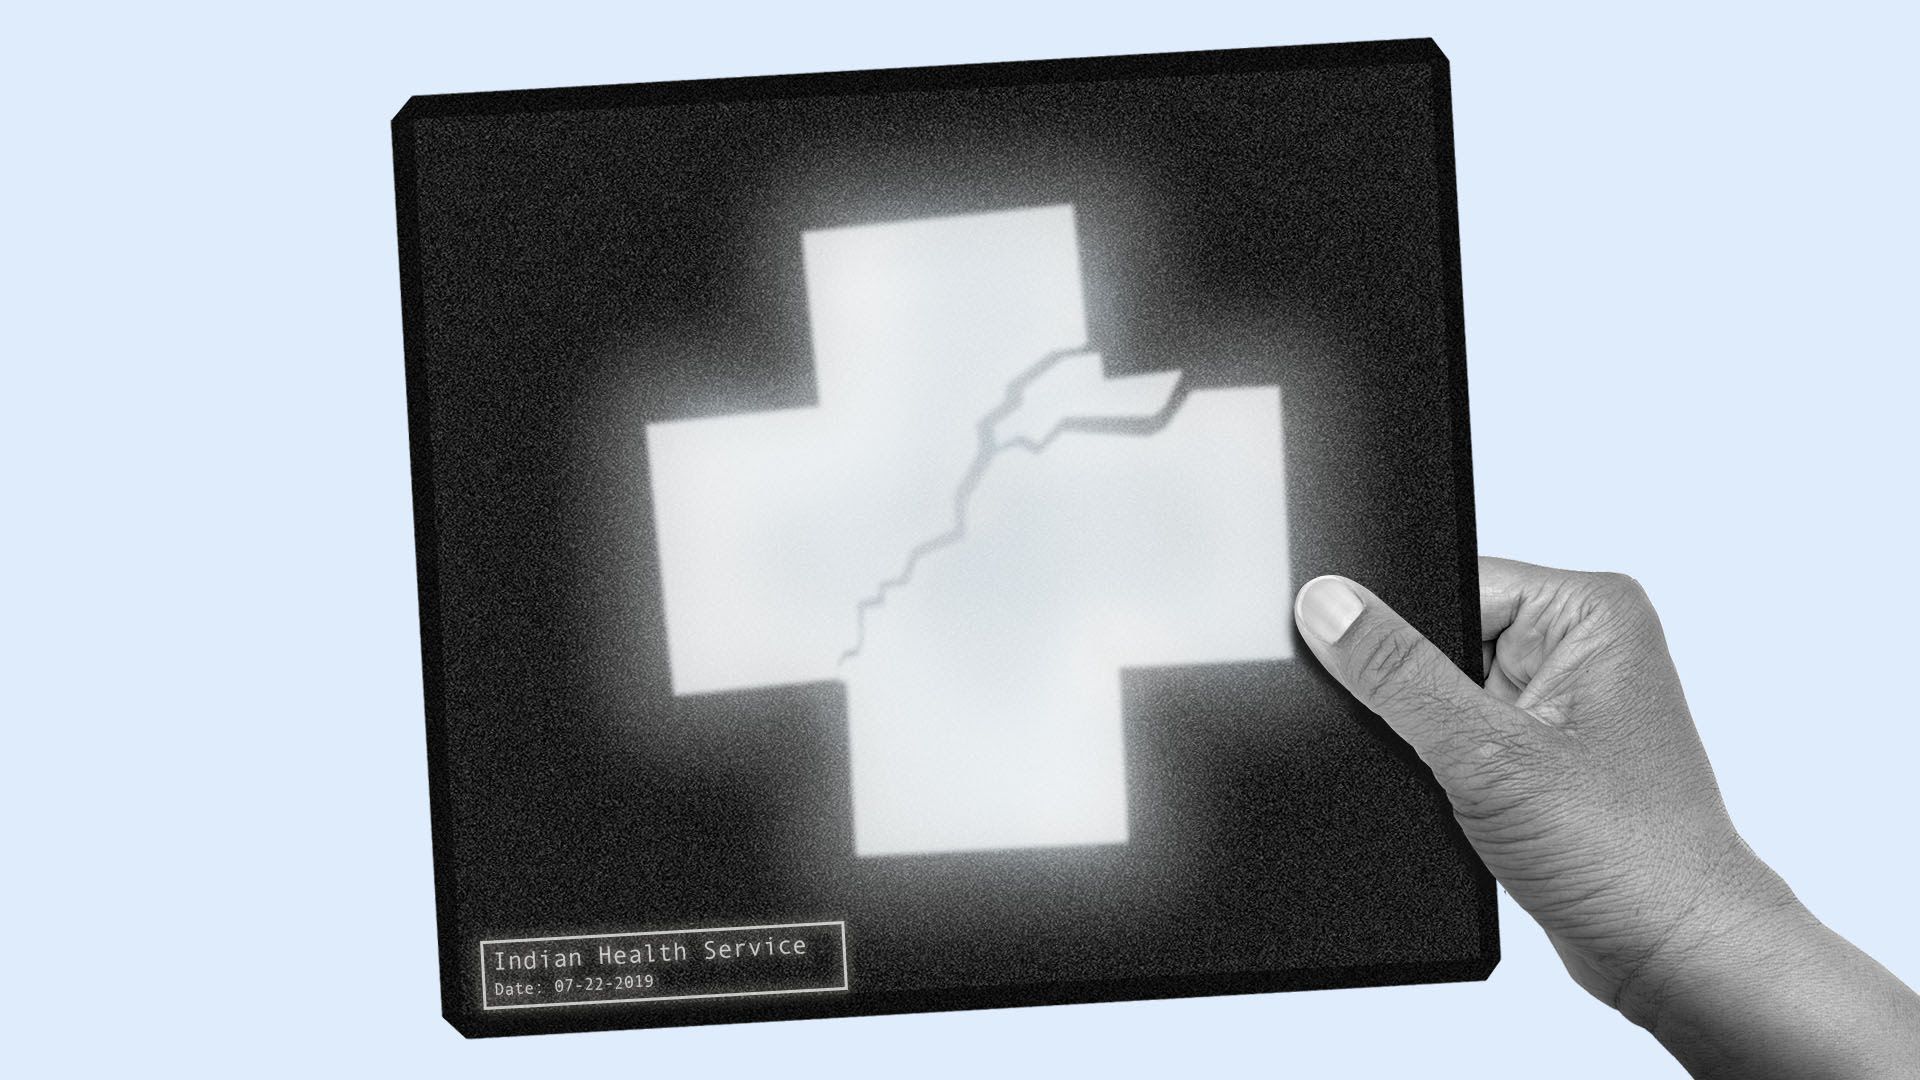 A hand holding up a broken health care symbol x-ray